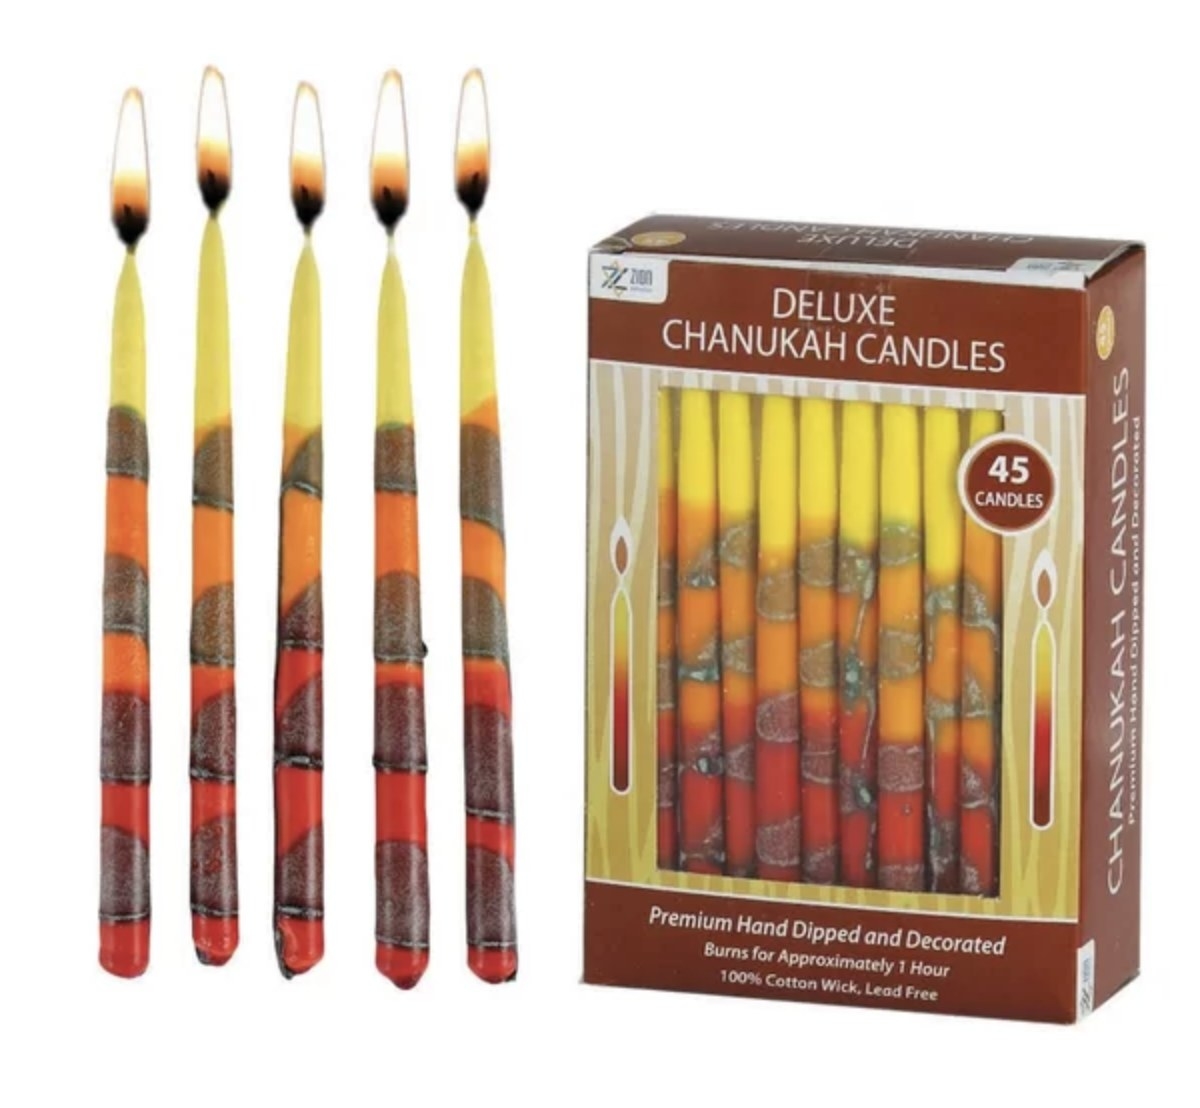 The taper candles are red, orange, yellow and have brown markings